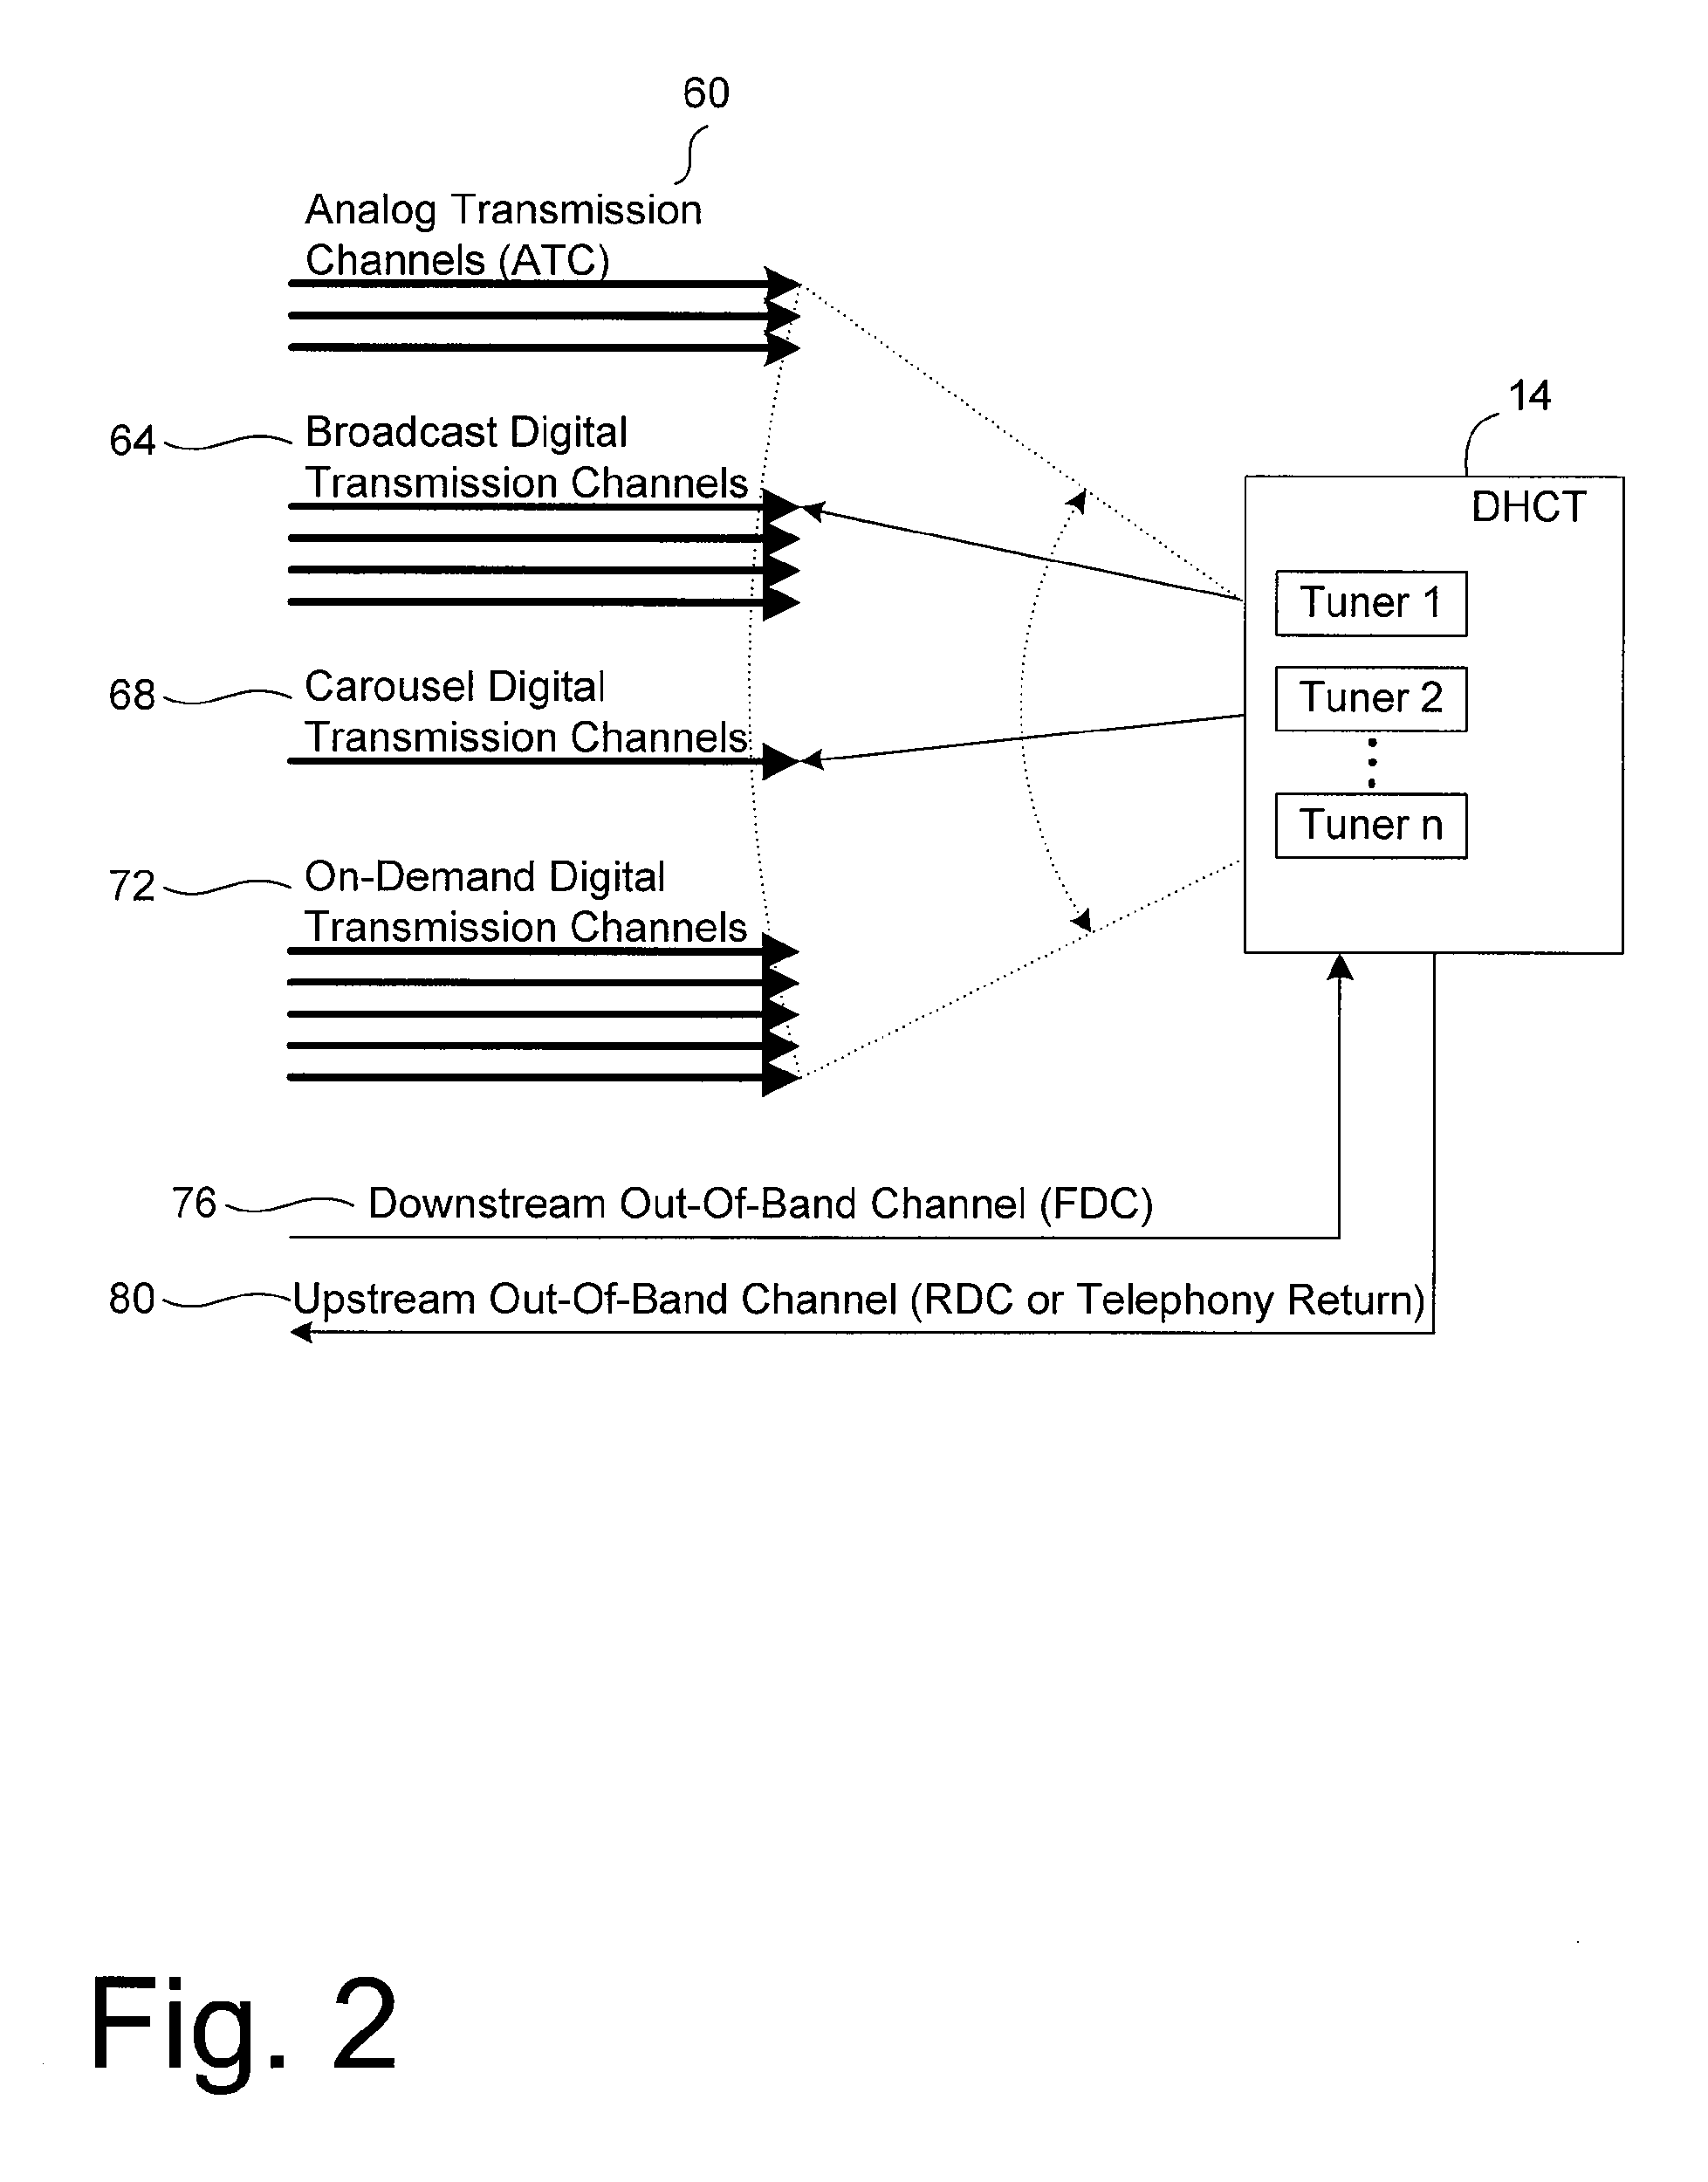 Systems and Methods for Dynamically Allocating Bandwidth in a Digital Broadband Delivery System